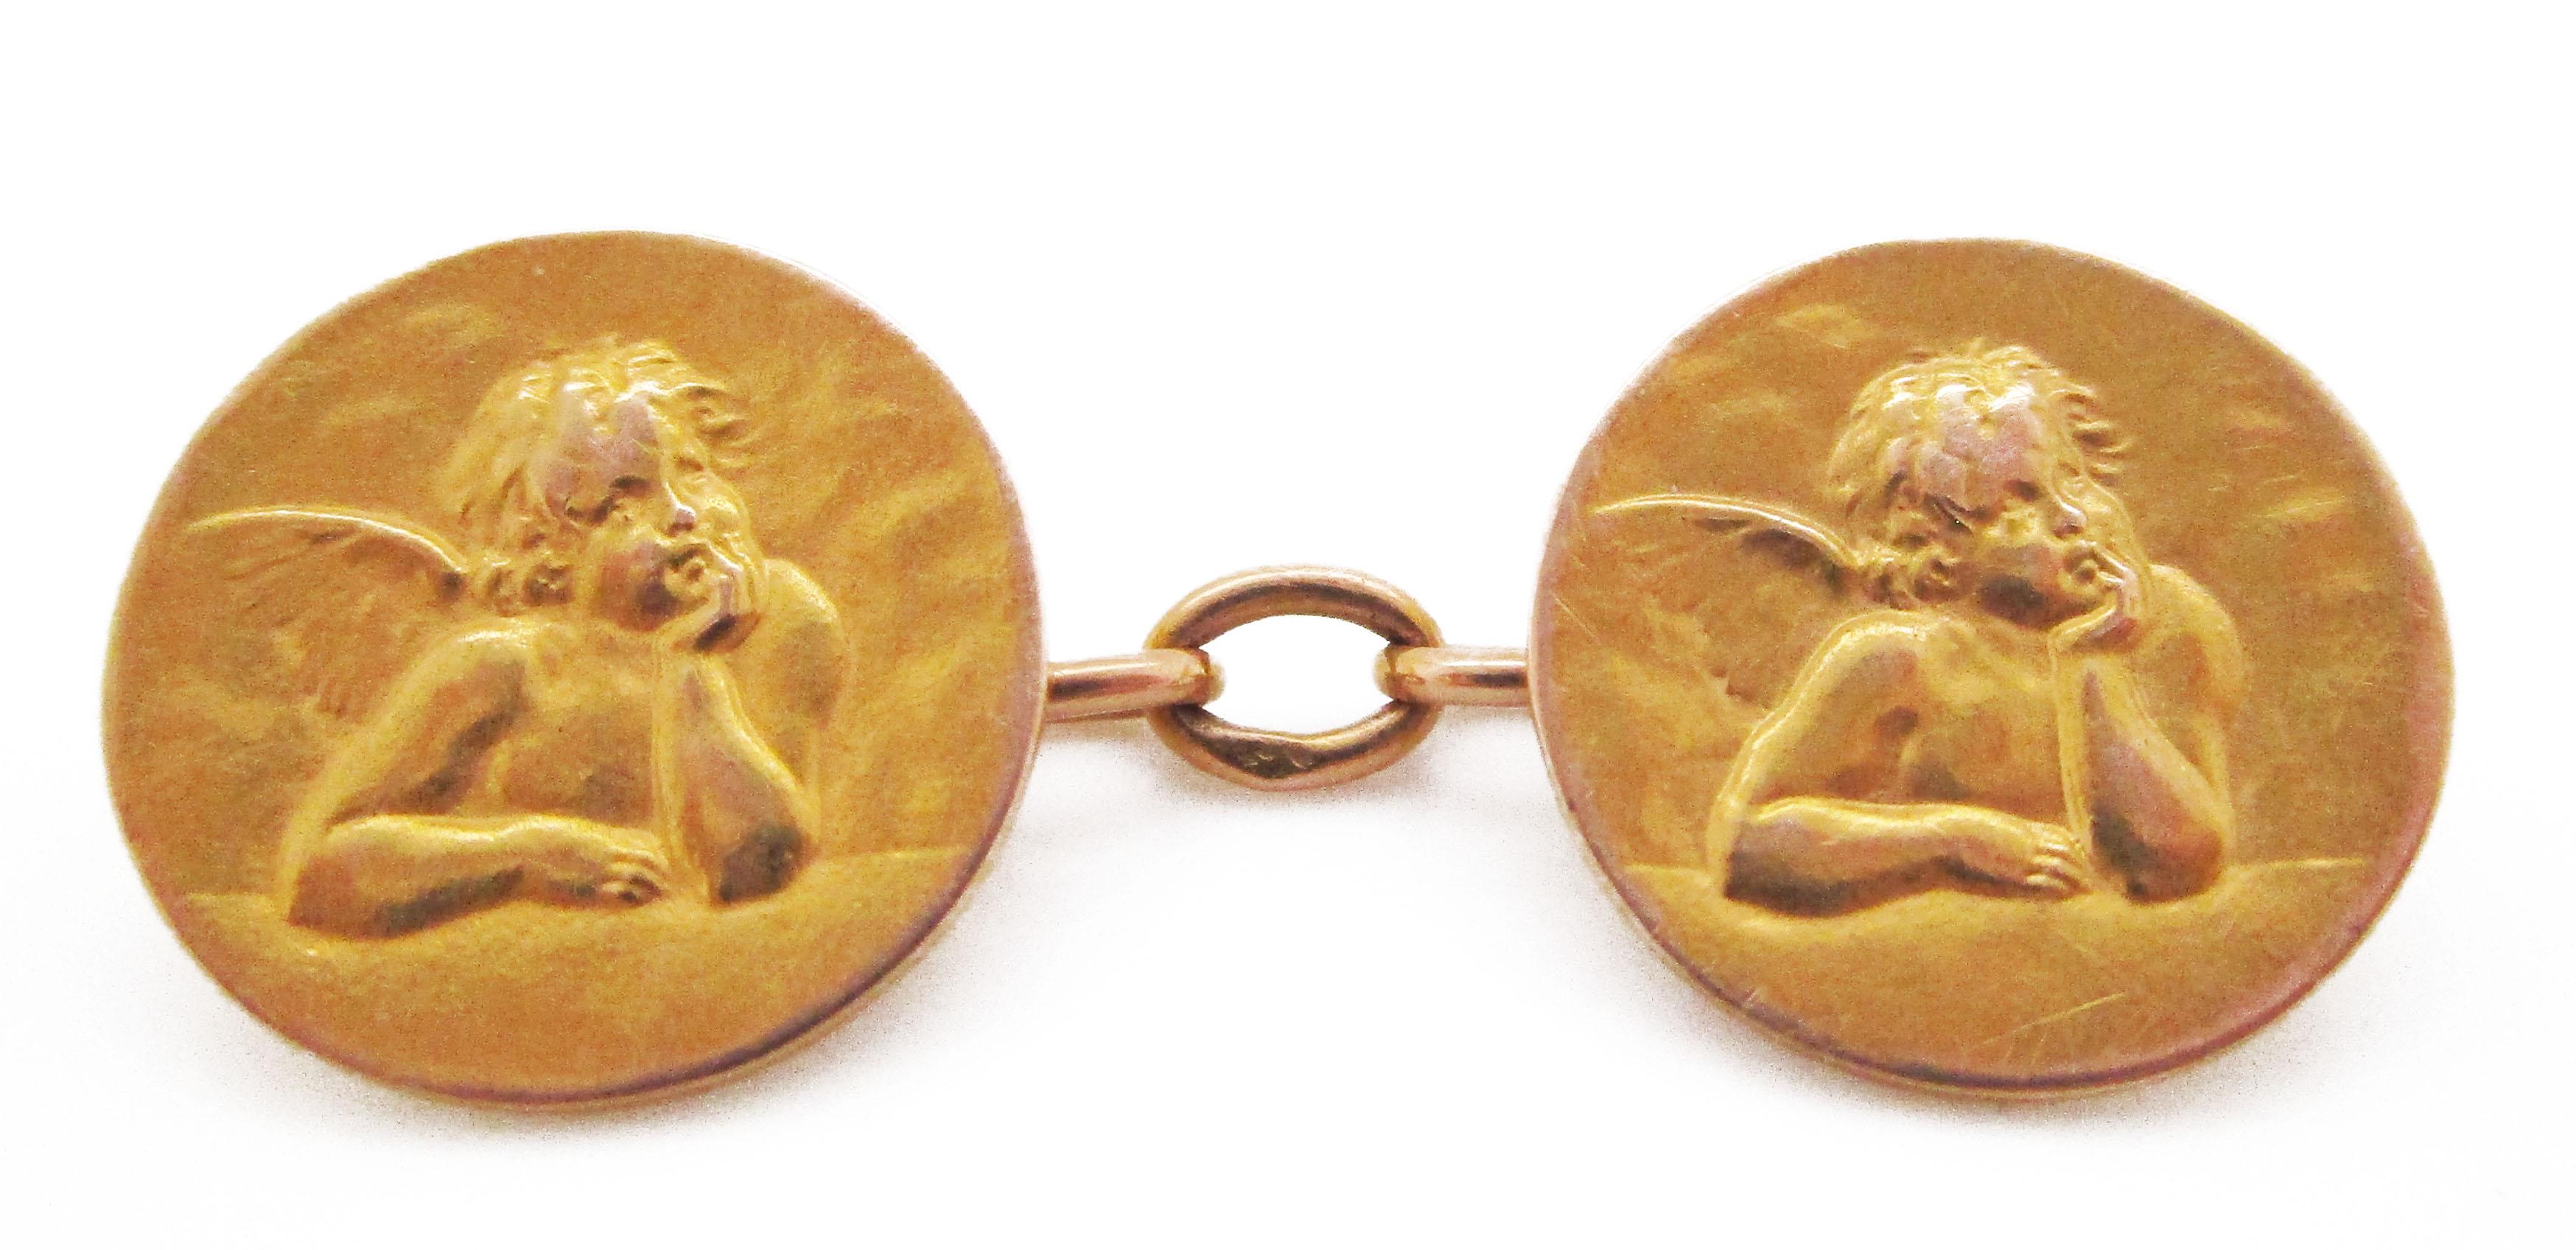 These stunning French hallmarked rich 18k yellow gold cufflinks feature a fantastic Raphael inspired cherub! The links are a circular design that makes them easy to wear. The 18k gold gives them a rich color and an excellent solid feel in the hand.